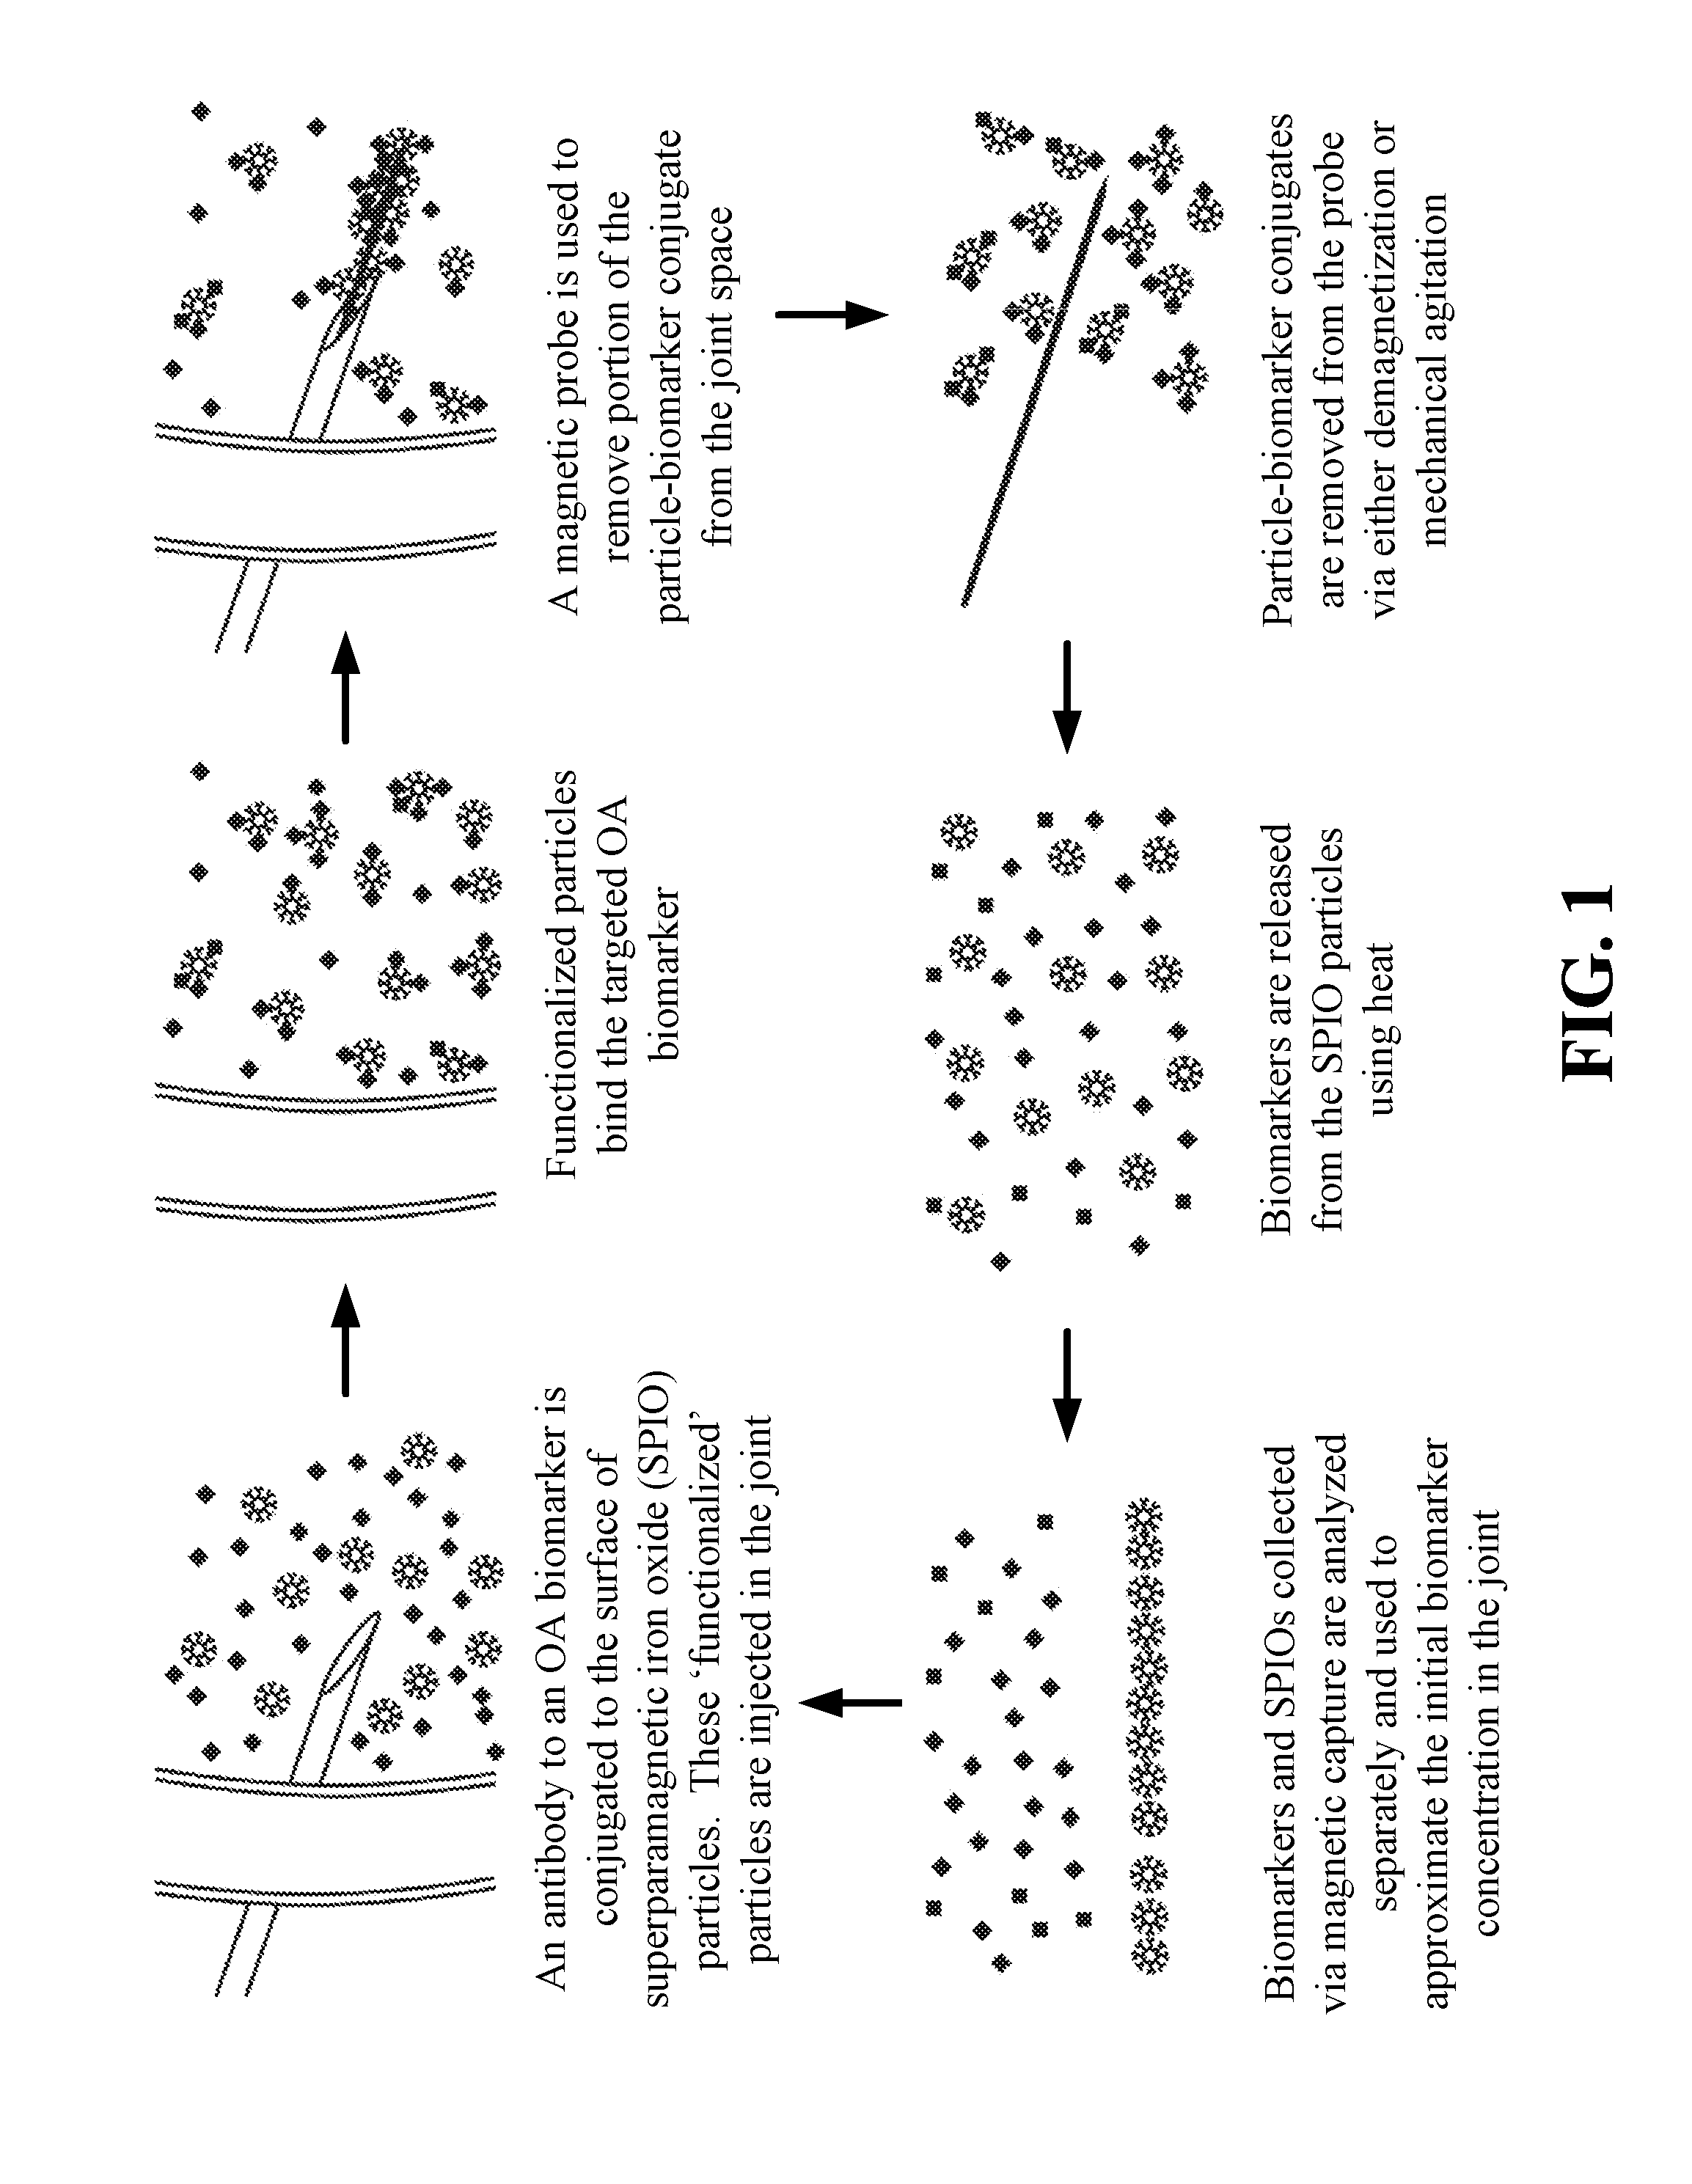 Magnetic apparatus and methods of use